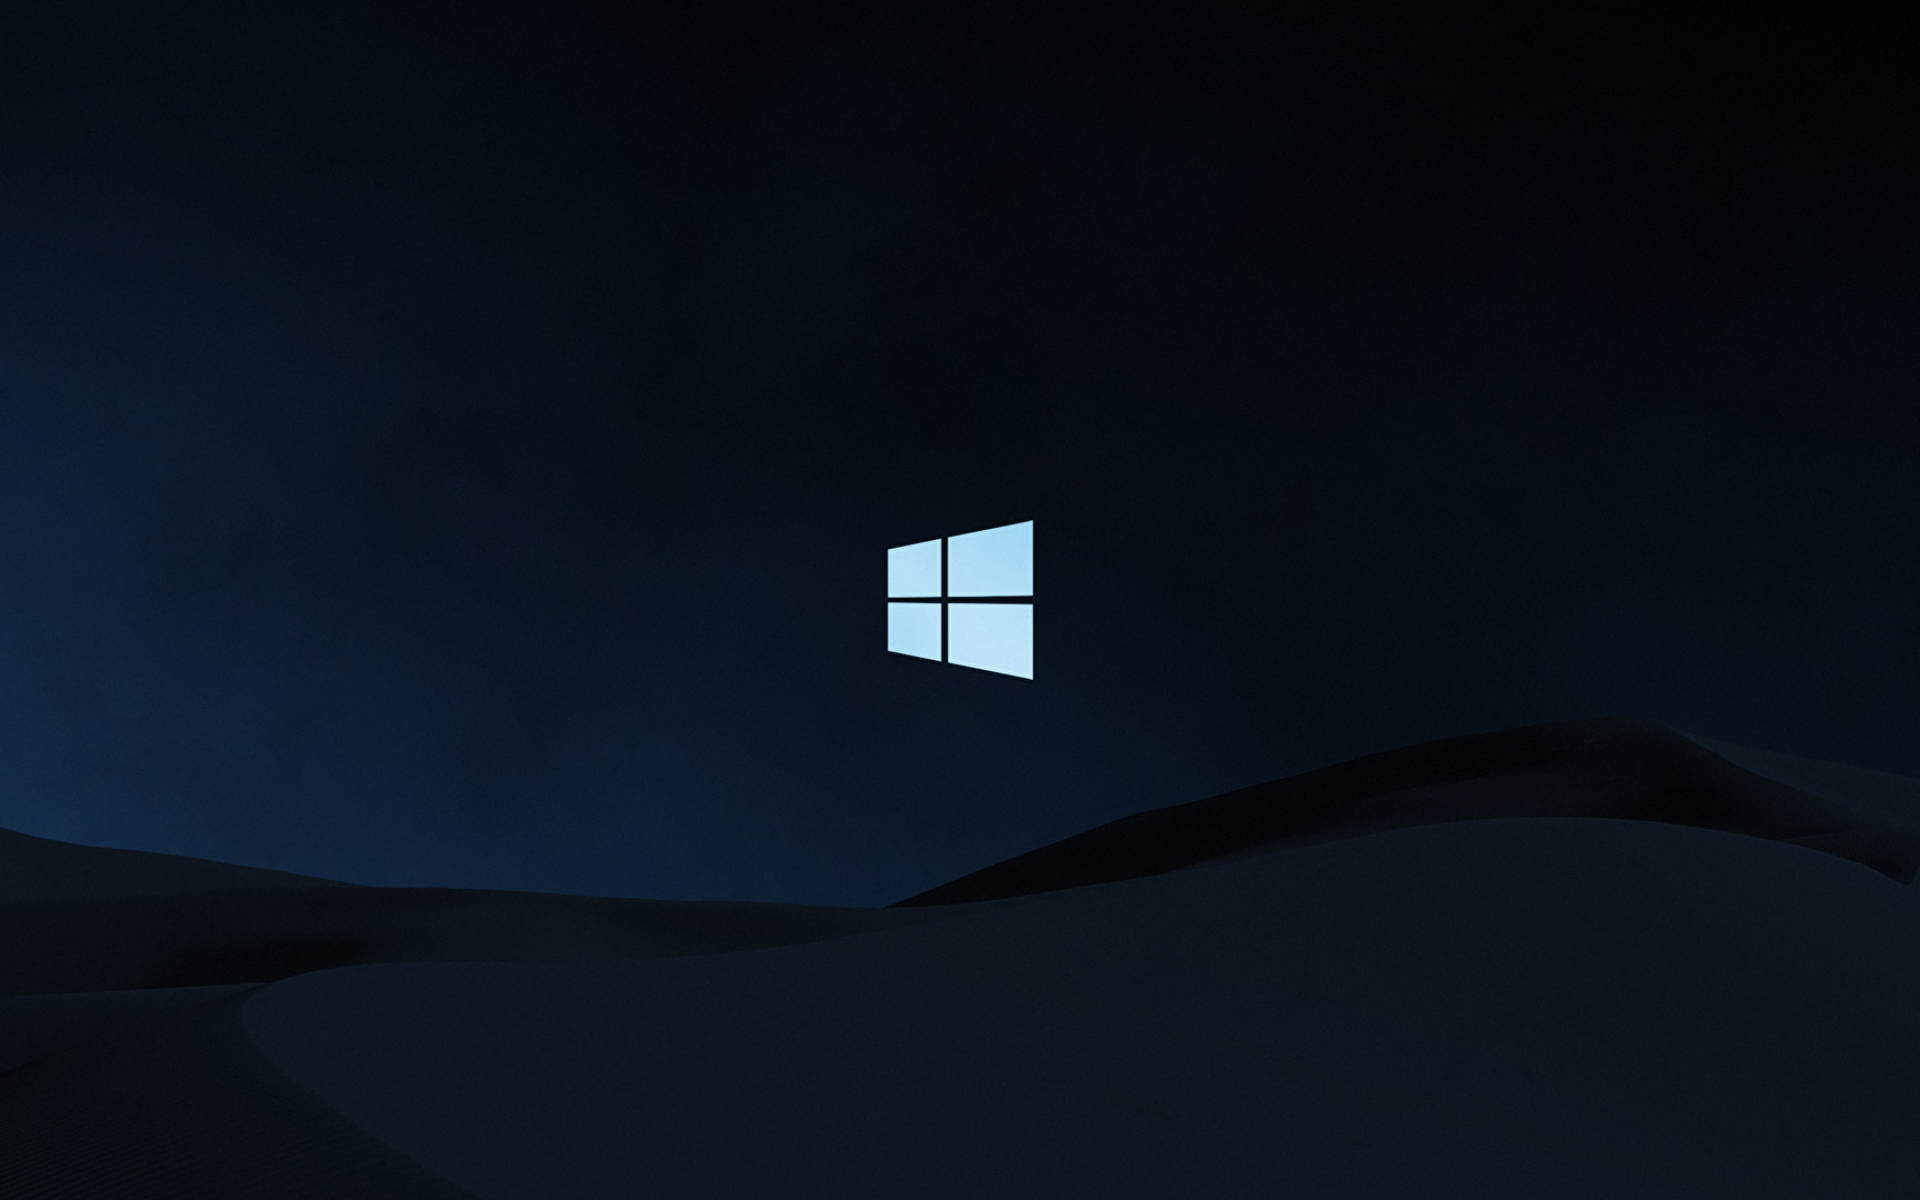 19x10 Windows 10 Clean Dark 10p Background Hd Brands 4k Wallpapers Images Photos And Background